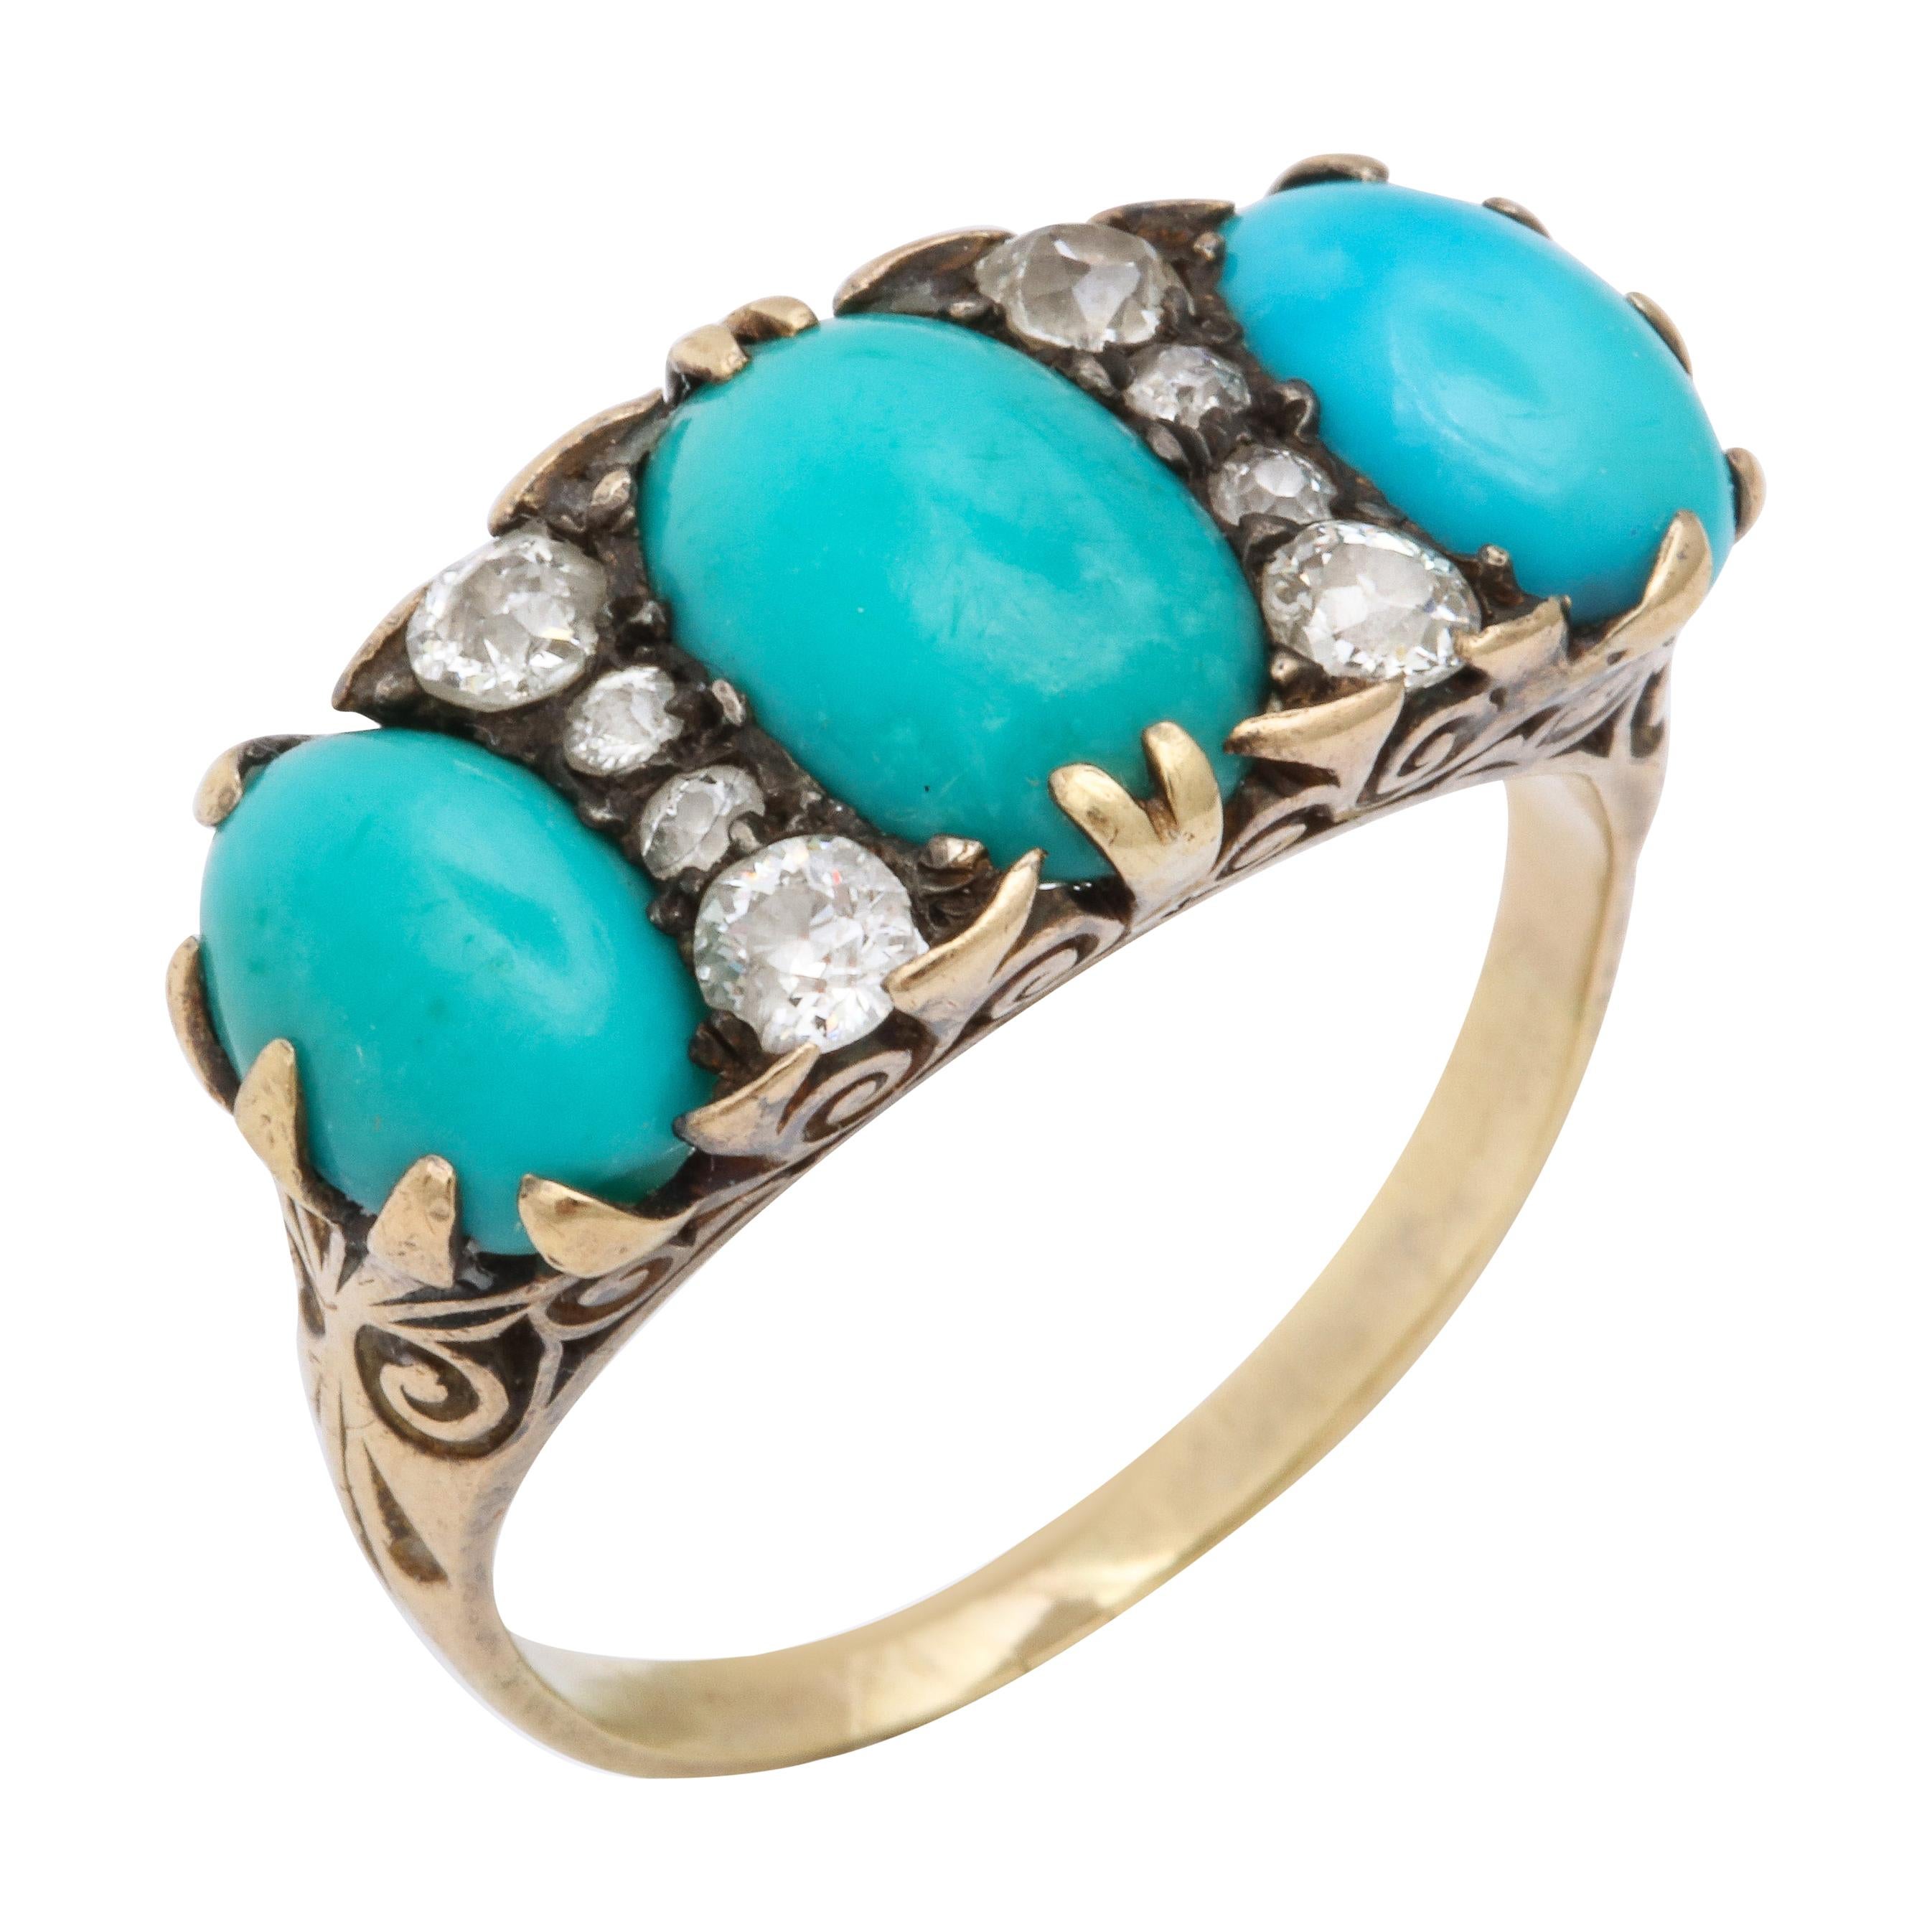 Antique Mid Victorian Turquoise and Diamond Ring